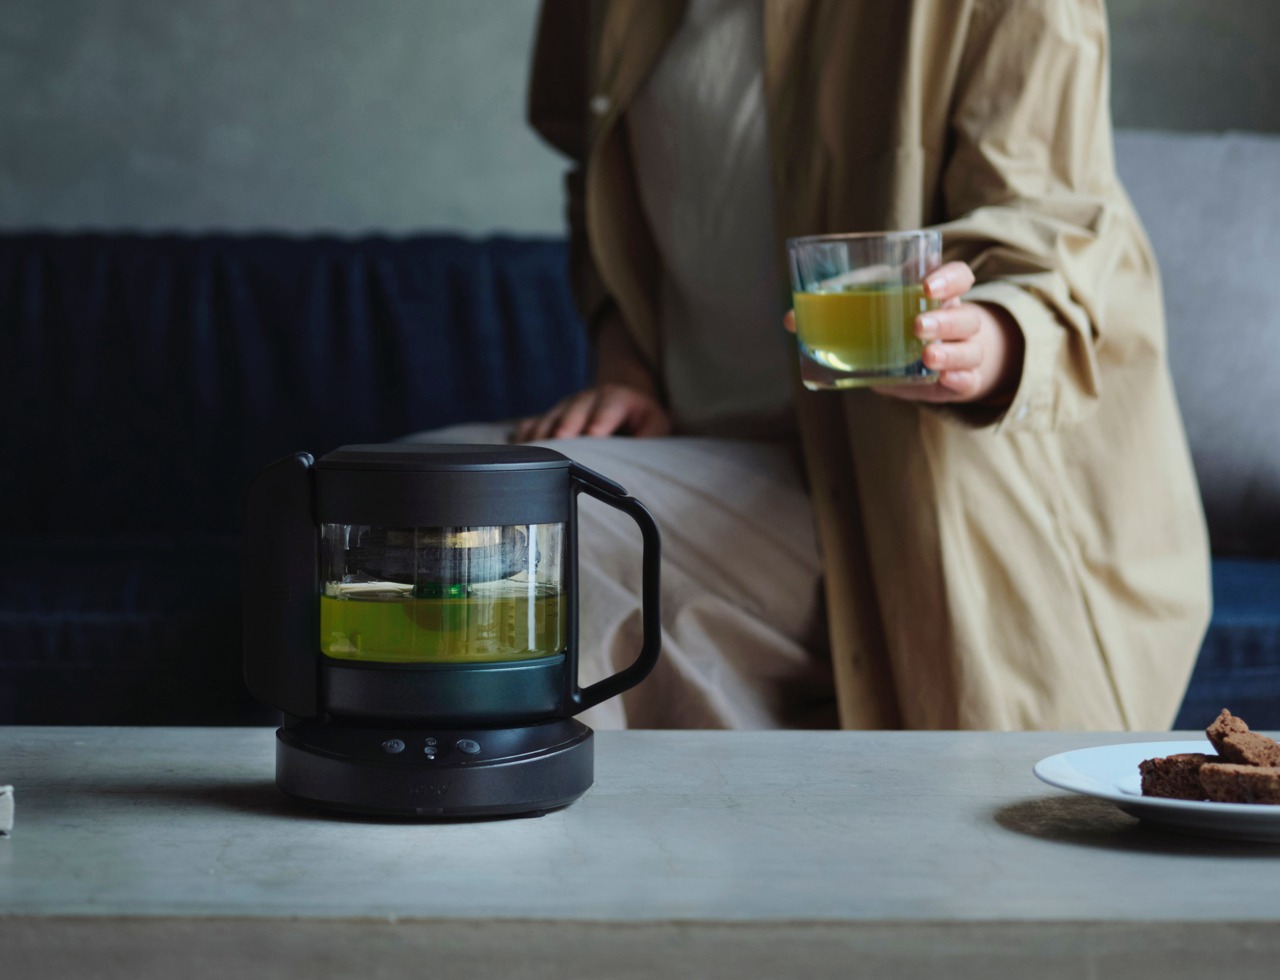 https://www.yankodesign.com/images/design_news/2022/11/this-smart-tea-pot-can-read-your-mood-to-make-the-perfect-brew/smart_tea_pot_for_a_personalized_tea_experience_10.jpg